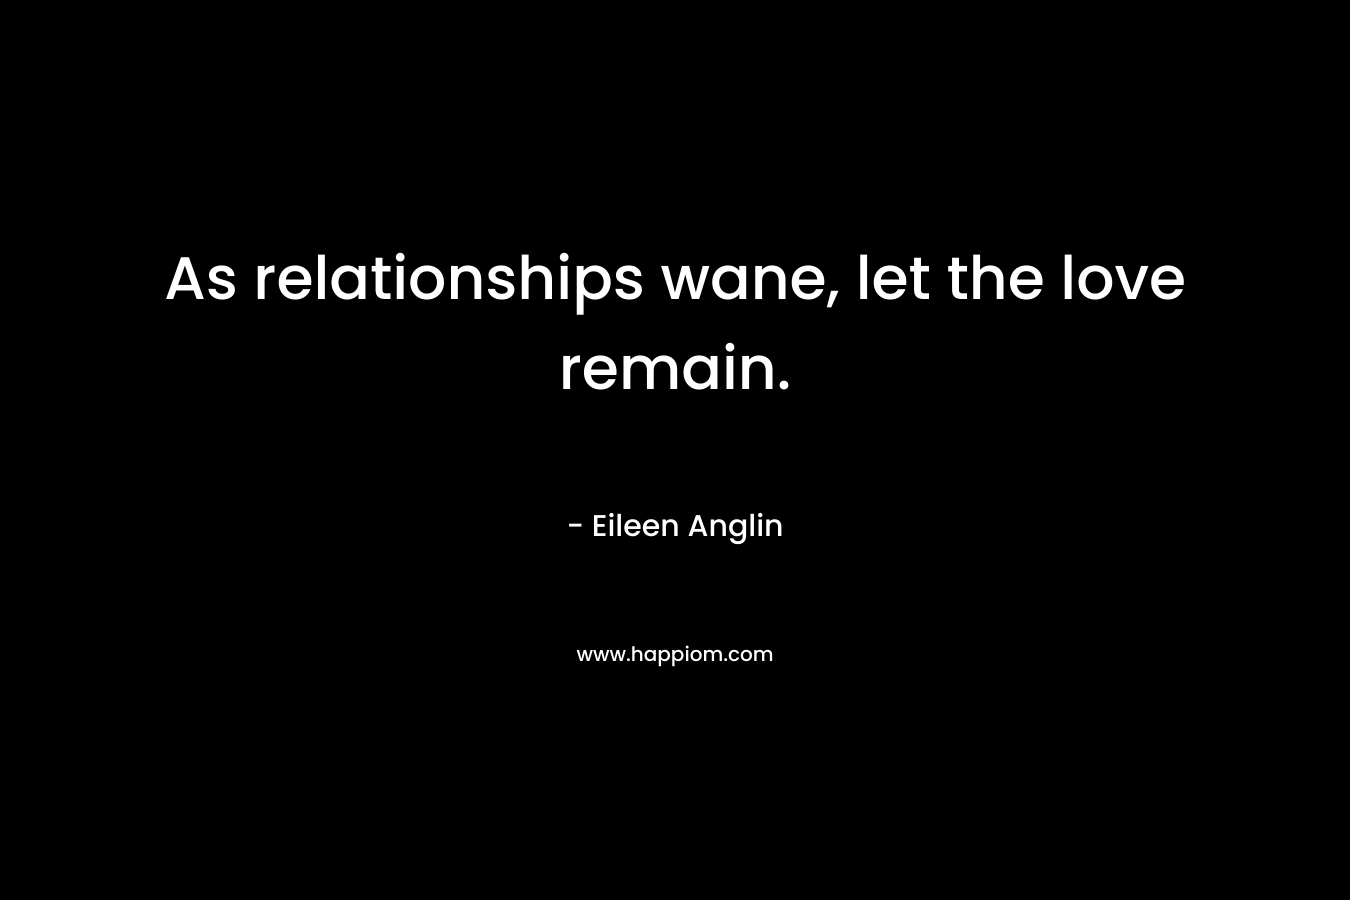 As relationships wane, let the love remain. – Eileen Anglin